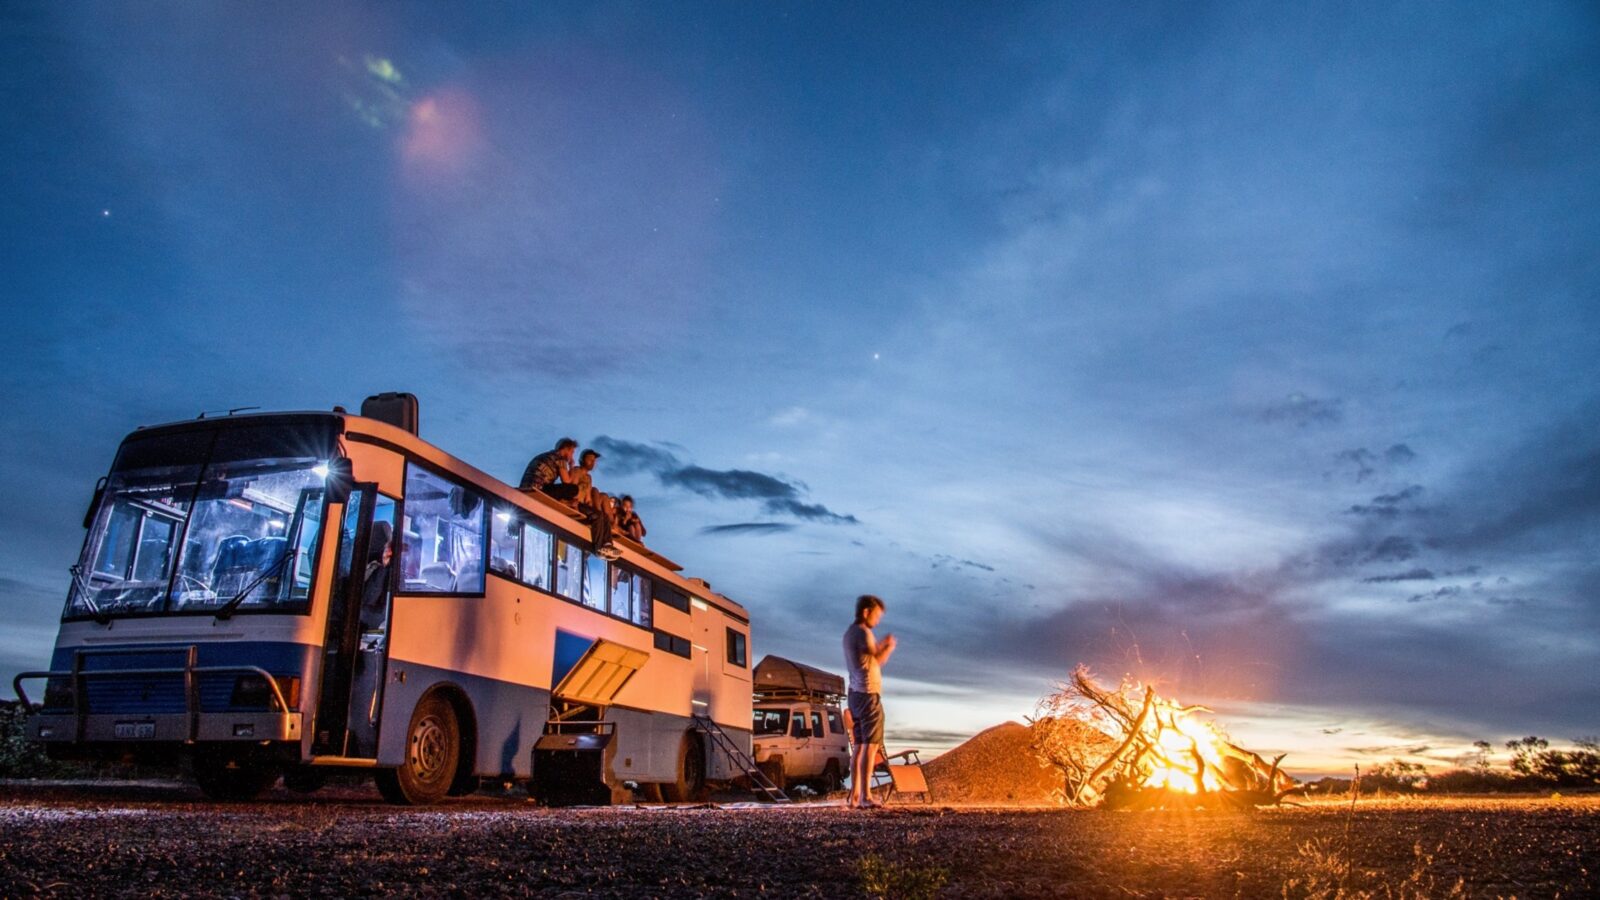 The bus and 4WD provide comfortable accommodation anywhere. Better than a rental campervan.